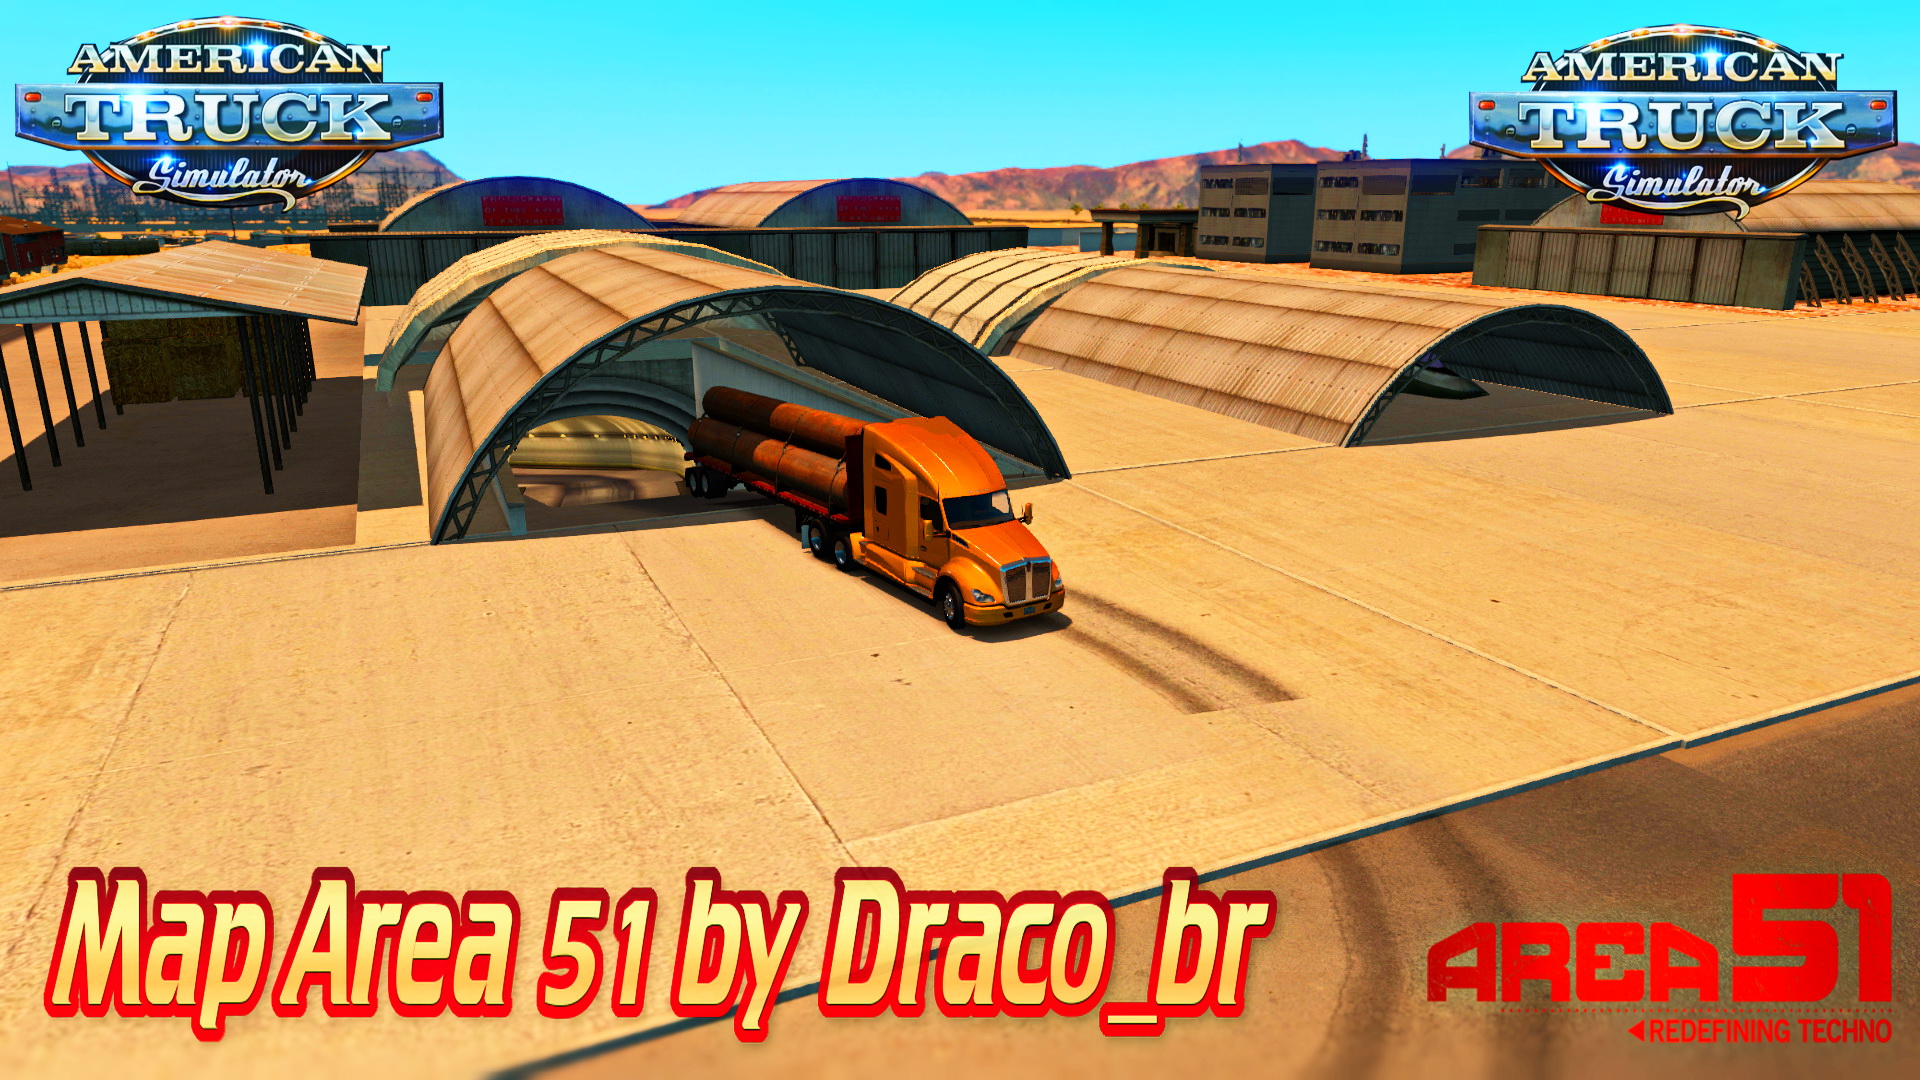 Map Area 51 by Draco_br (American Truck Simulator)